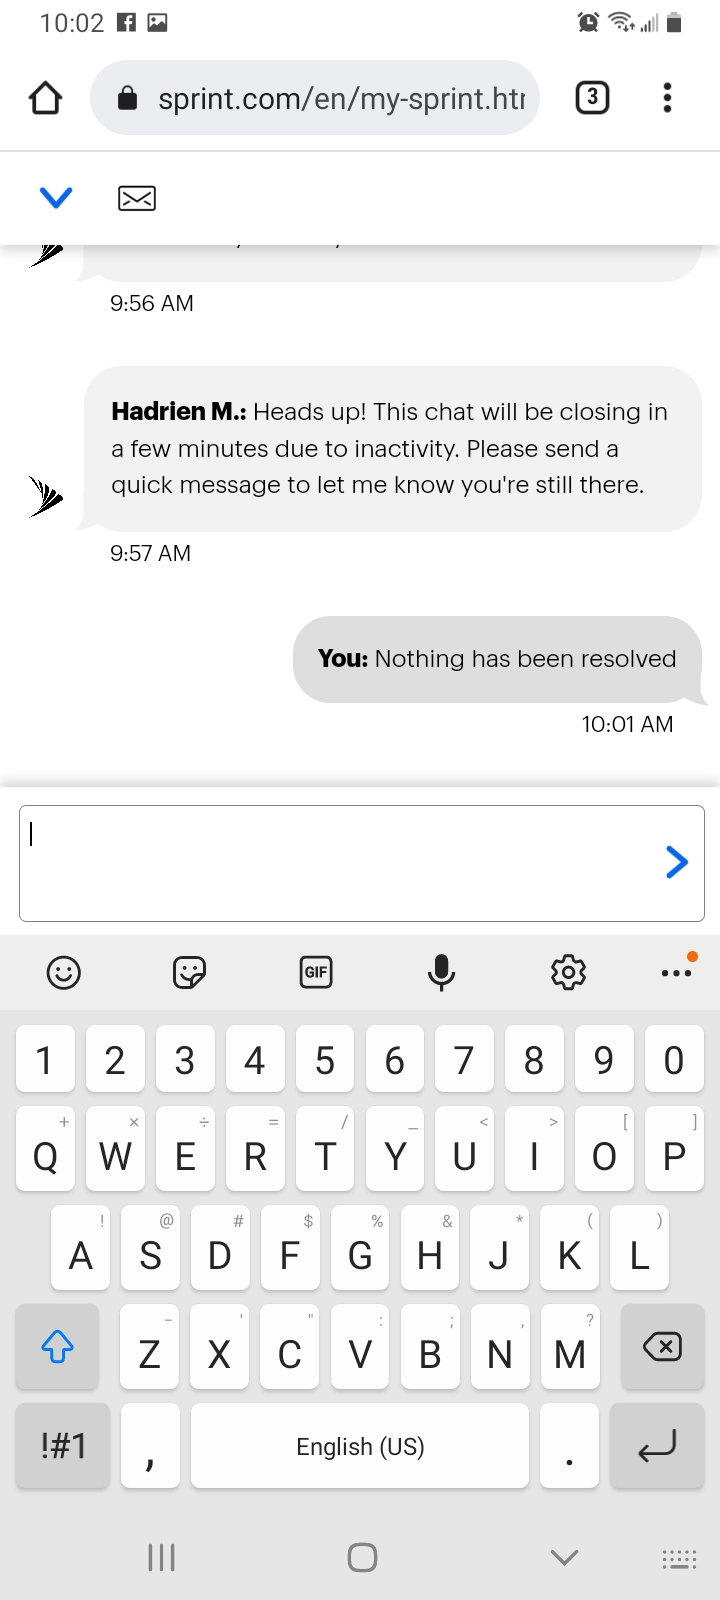 T mobile customer service chat